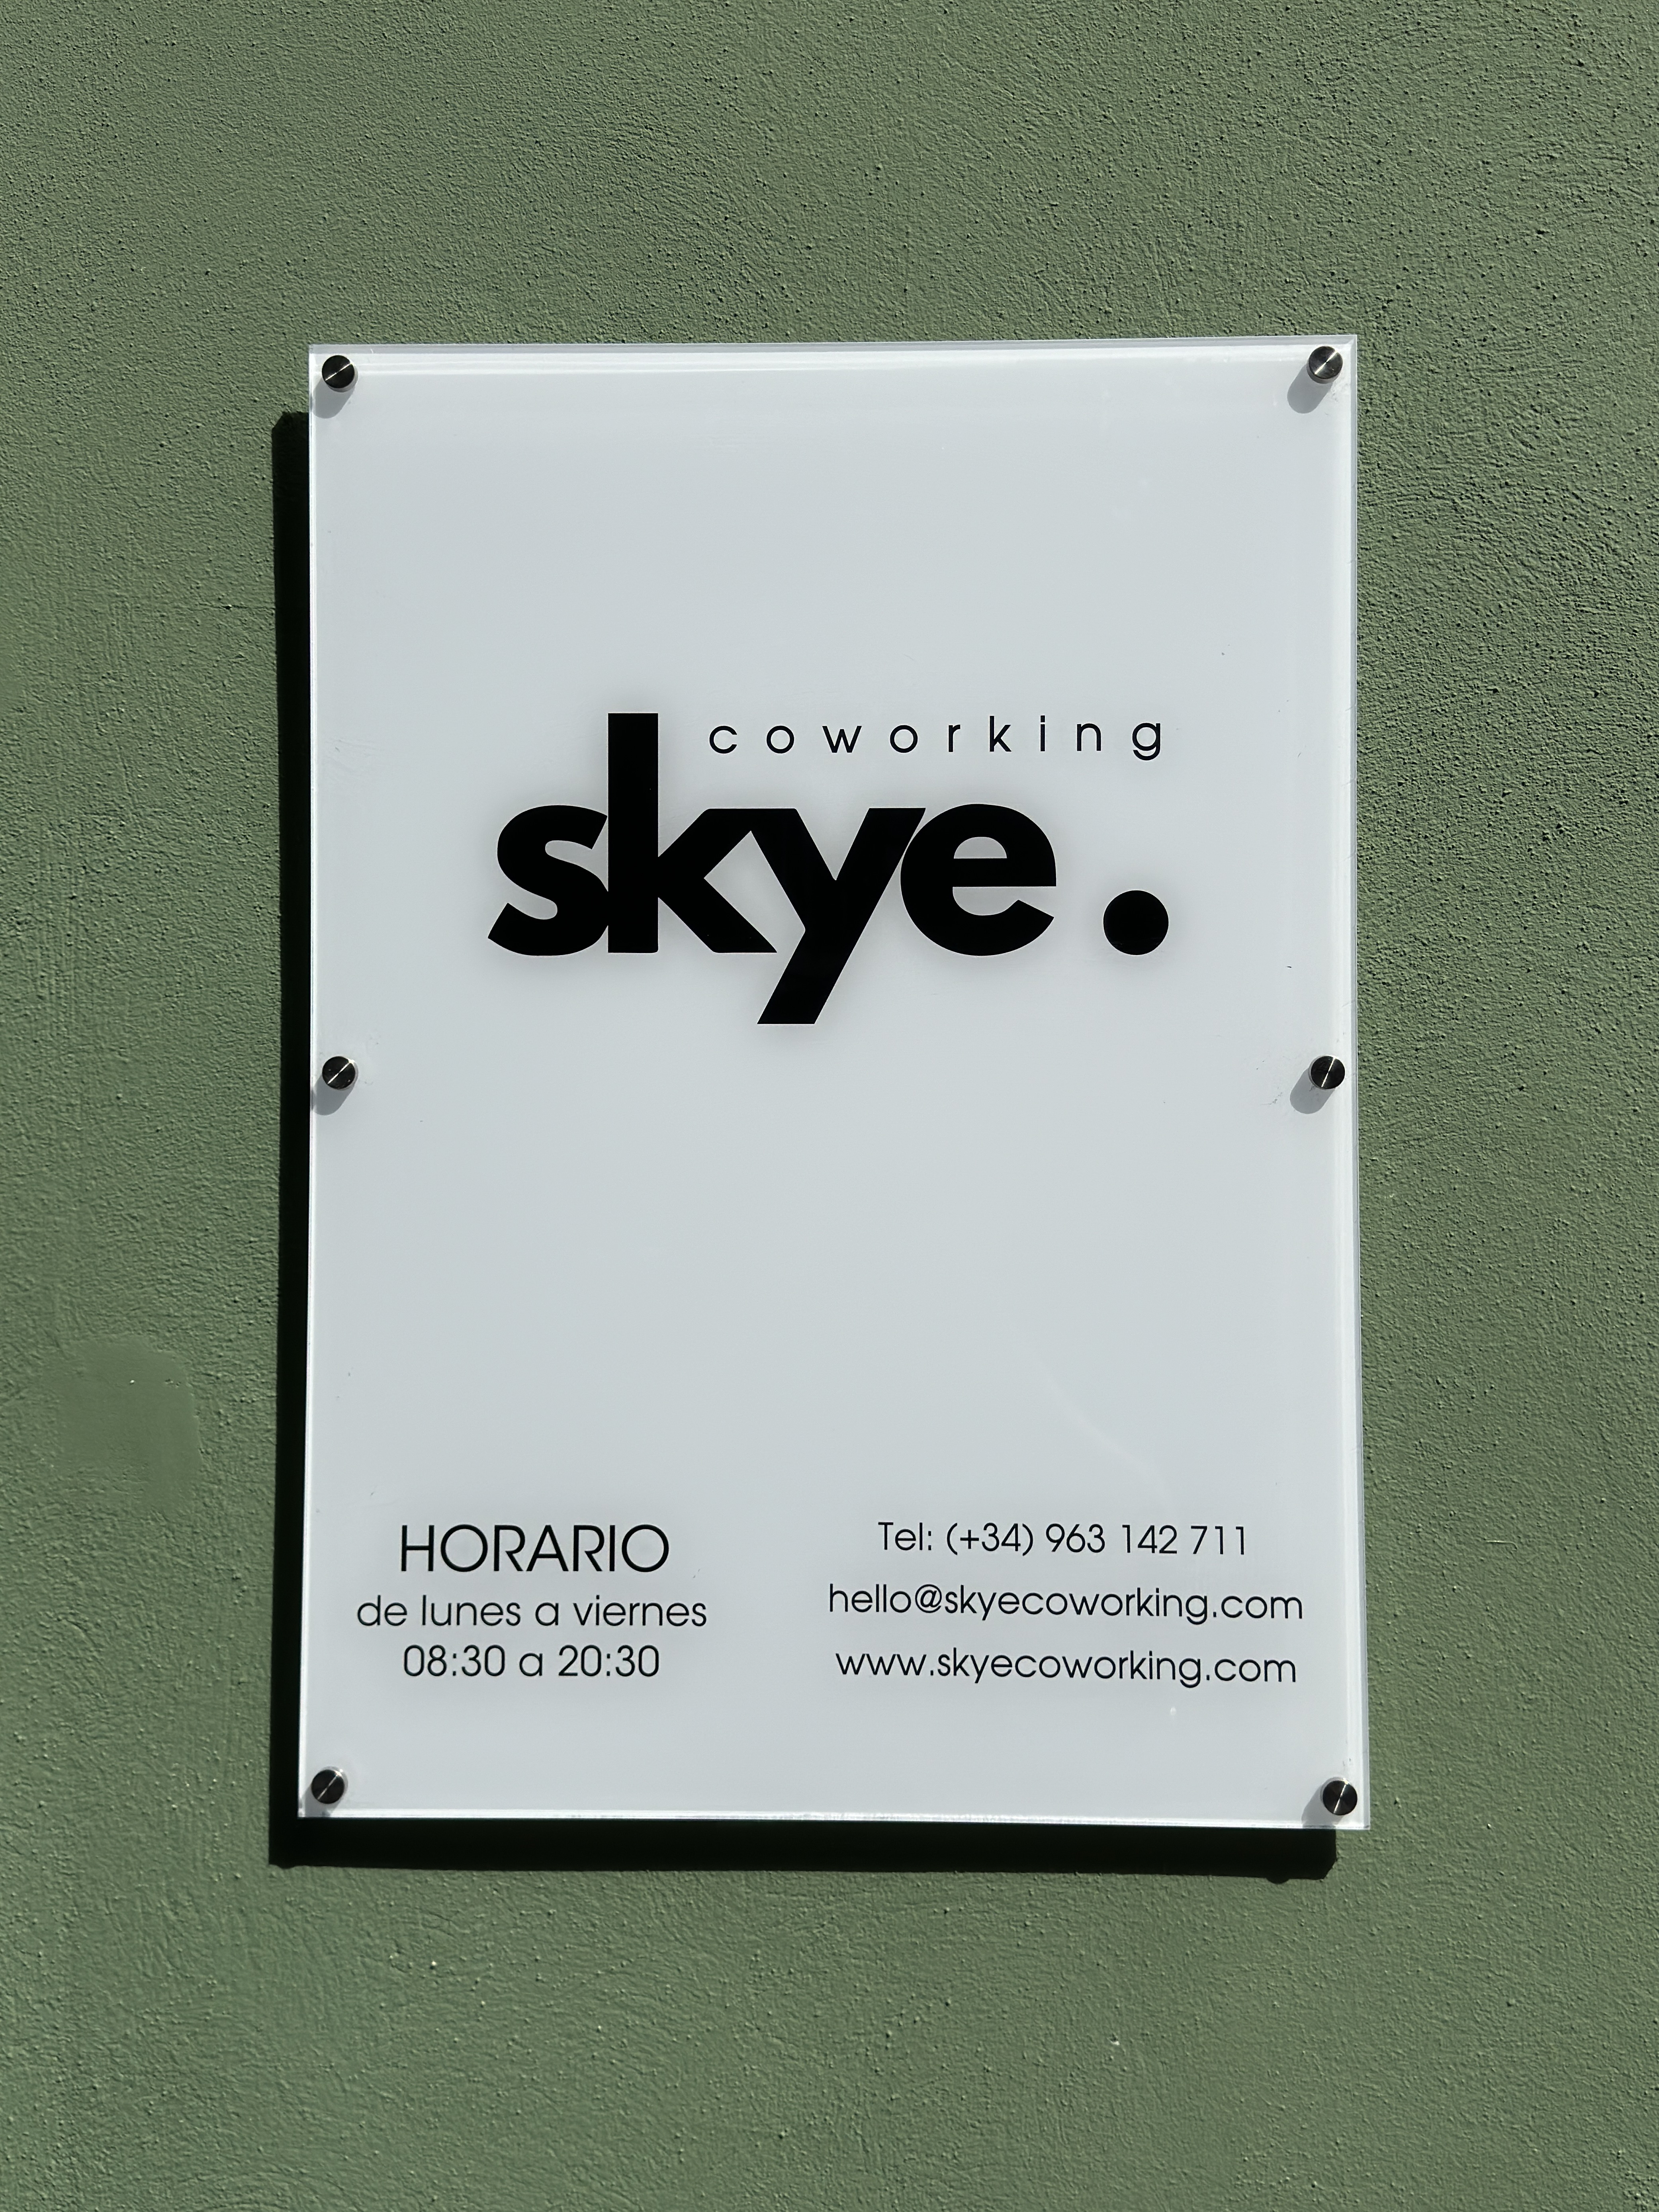 Skye. Coworking Valencia information, with contact number, contact email, website and opening hours.